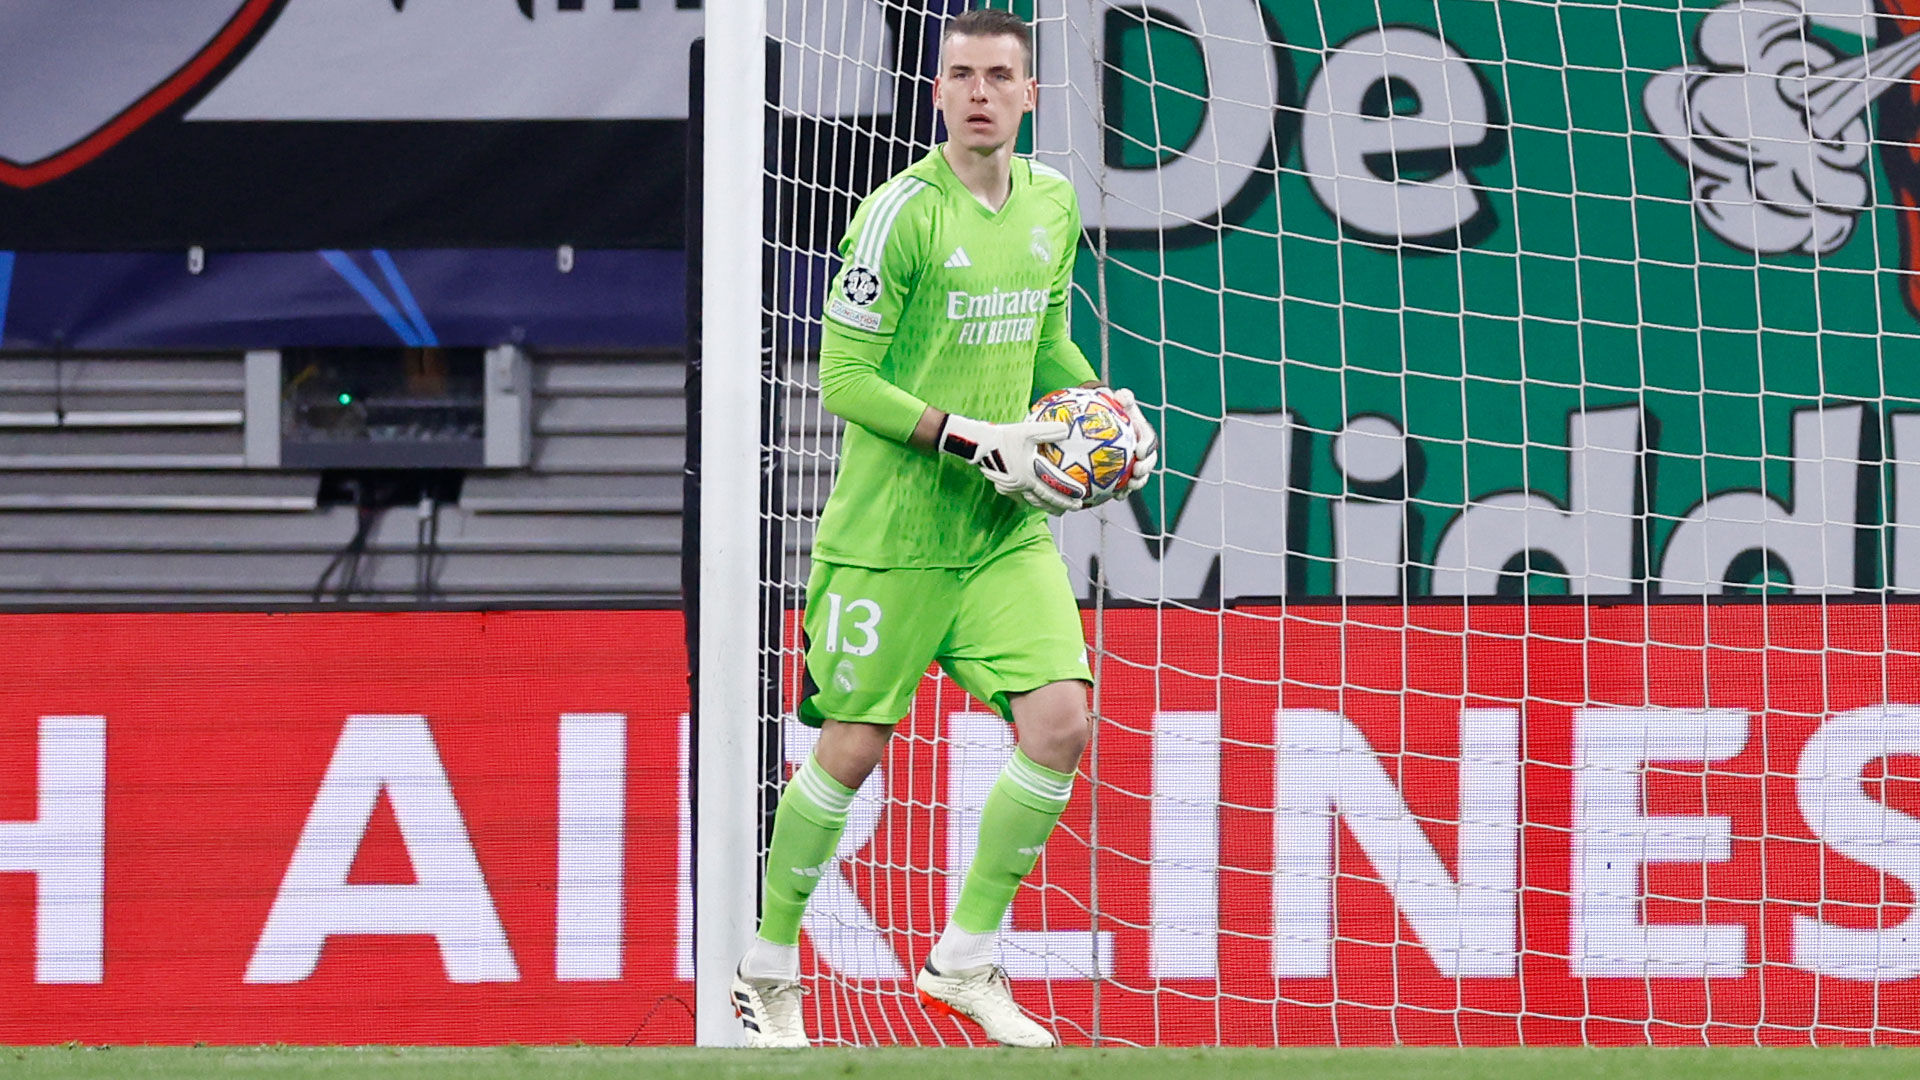 Lunin: "We come away with a win and a slight advantage"